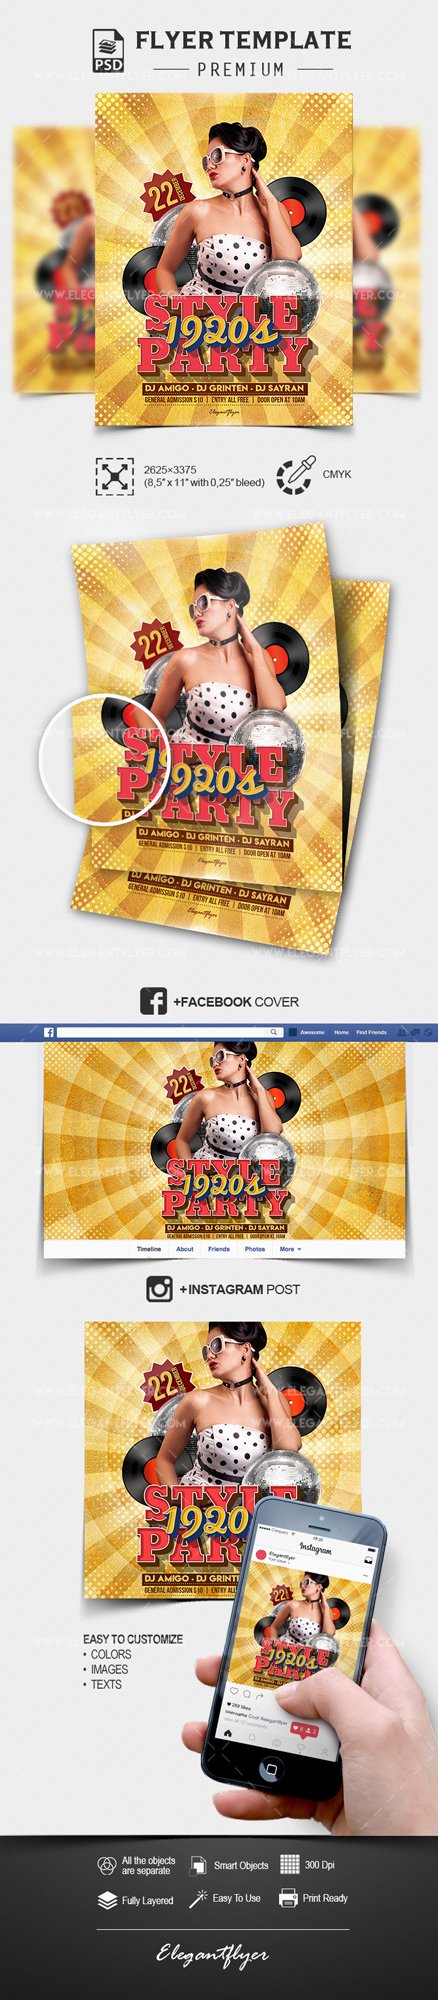 1920s Style Party – Flyer PSD Template + Facebook Cover + Instagram Post